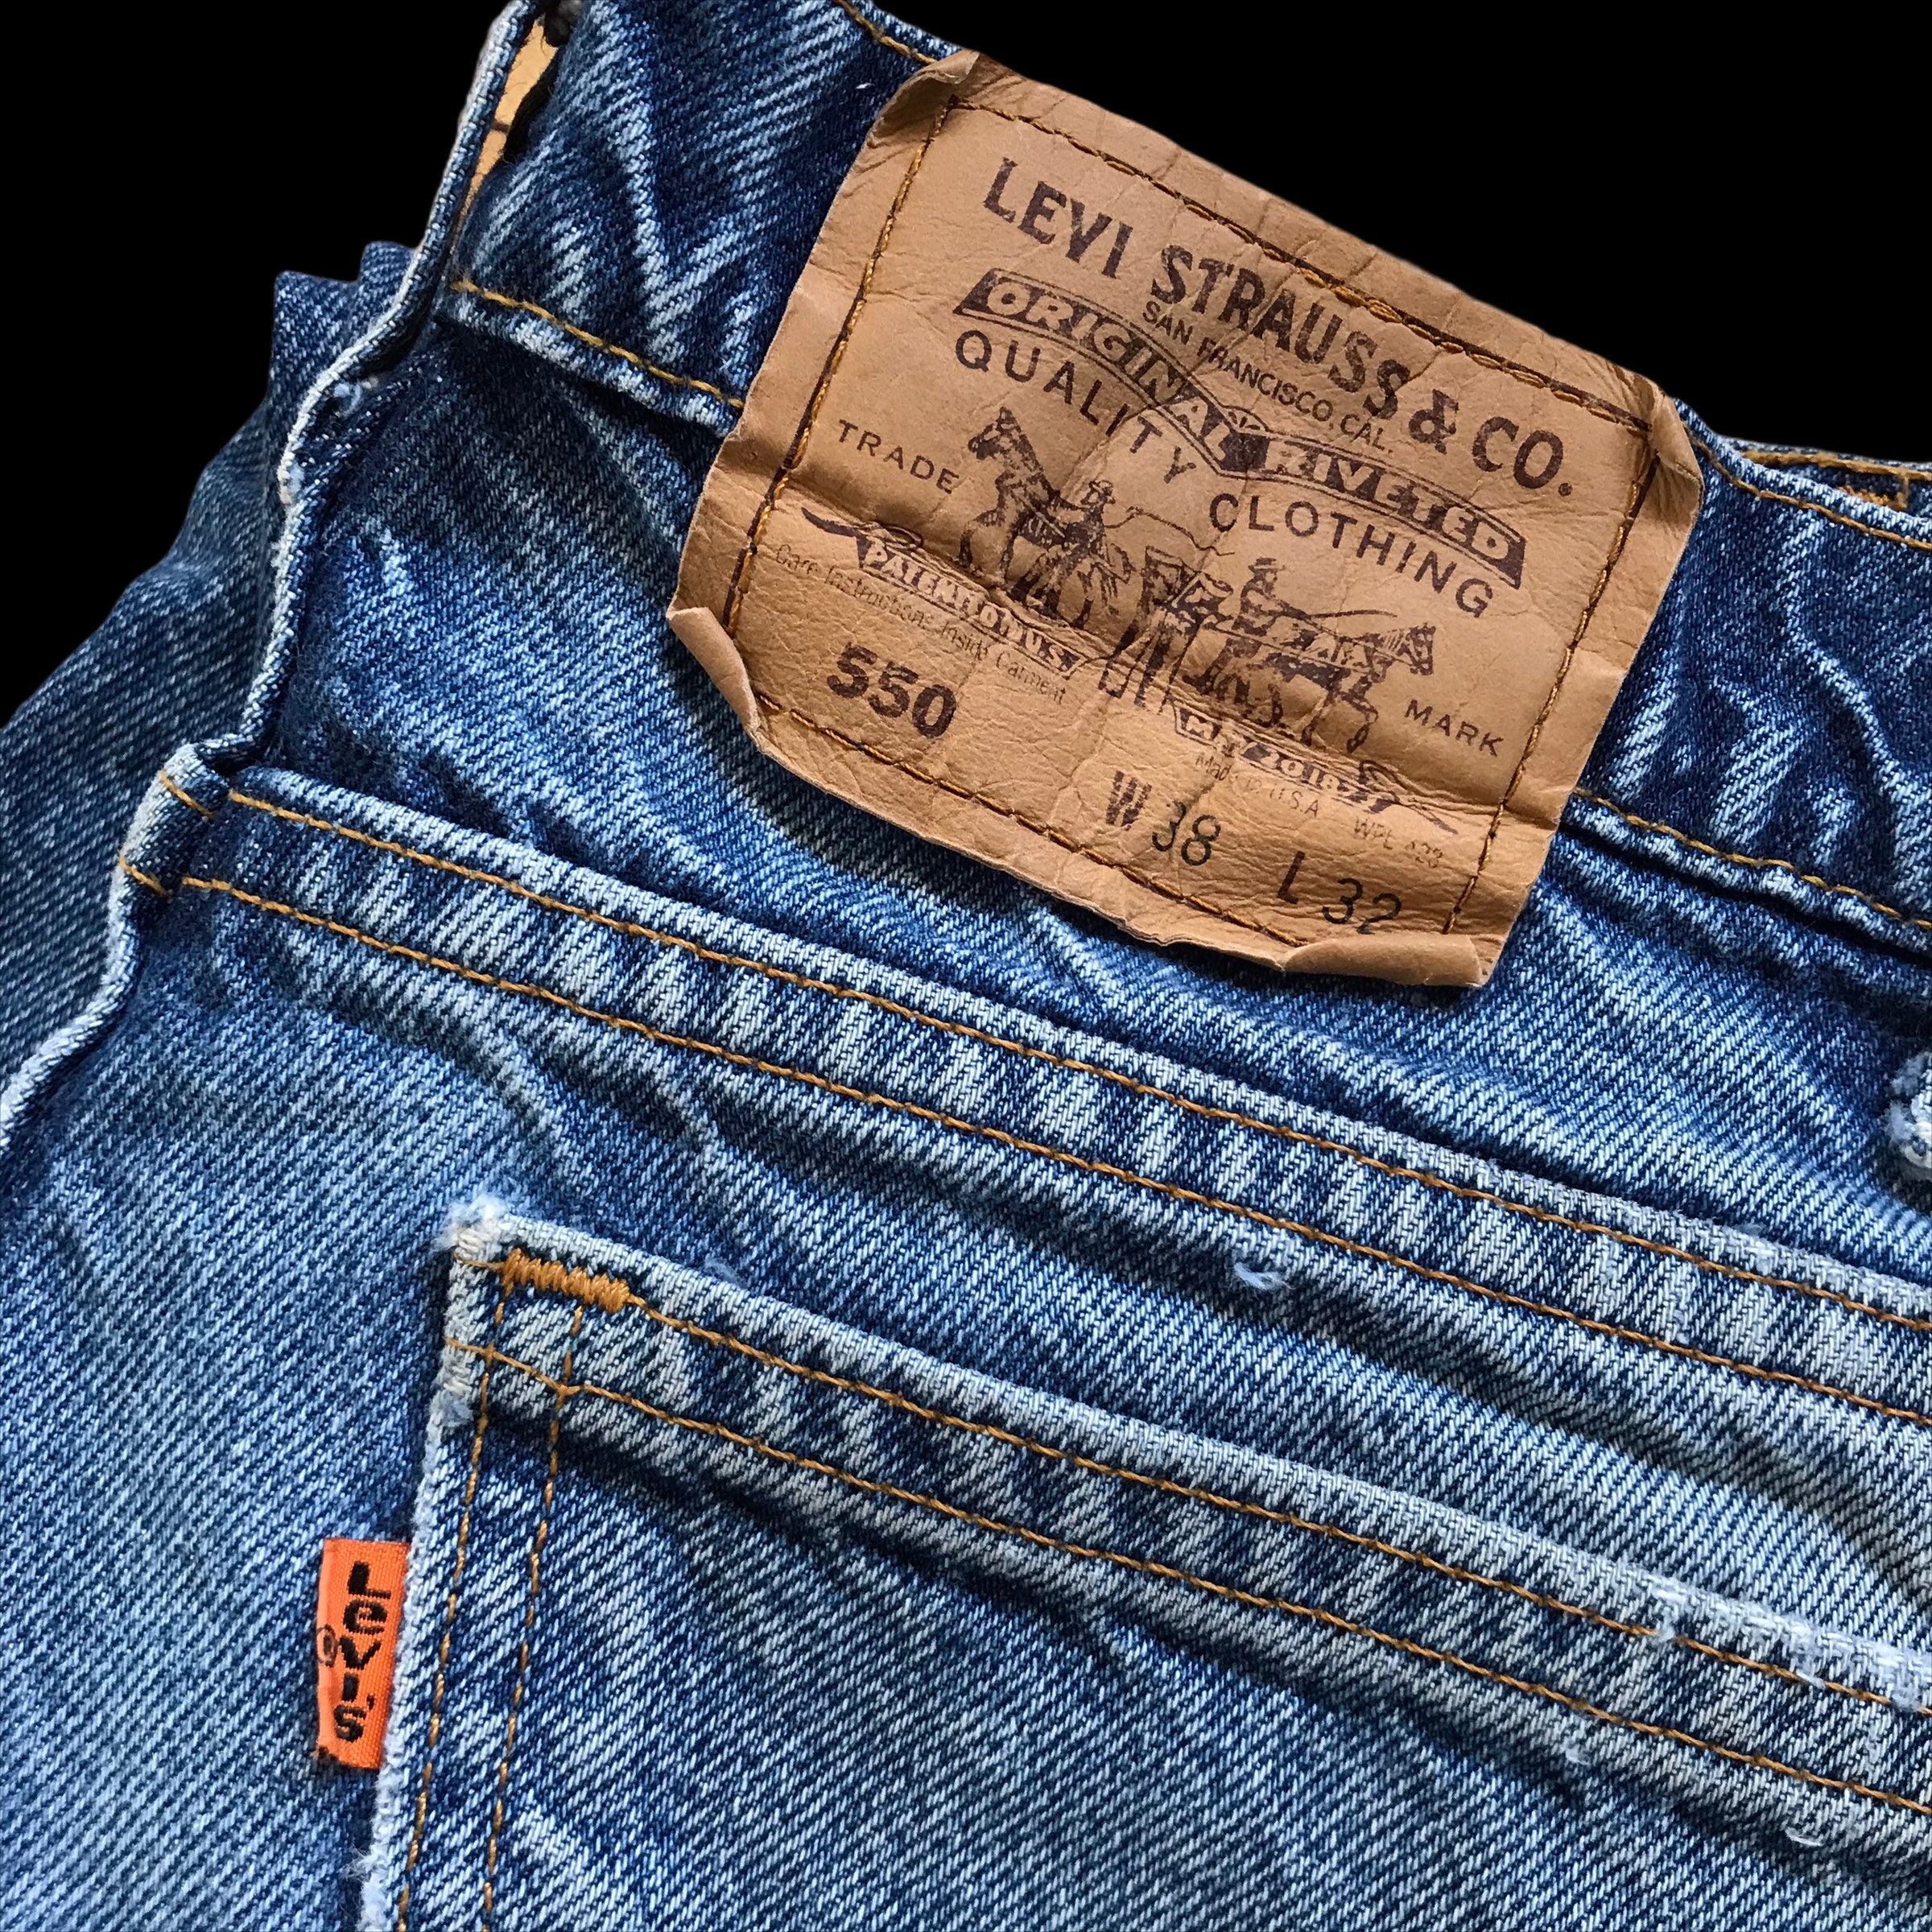 Levi’s Orange Tabs 550 Vintage Jeans Relaxed Fit 31x30 - munimoro.gob.pe